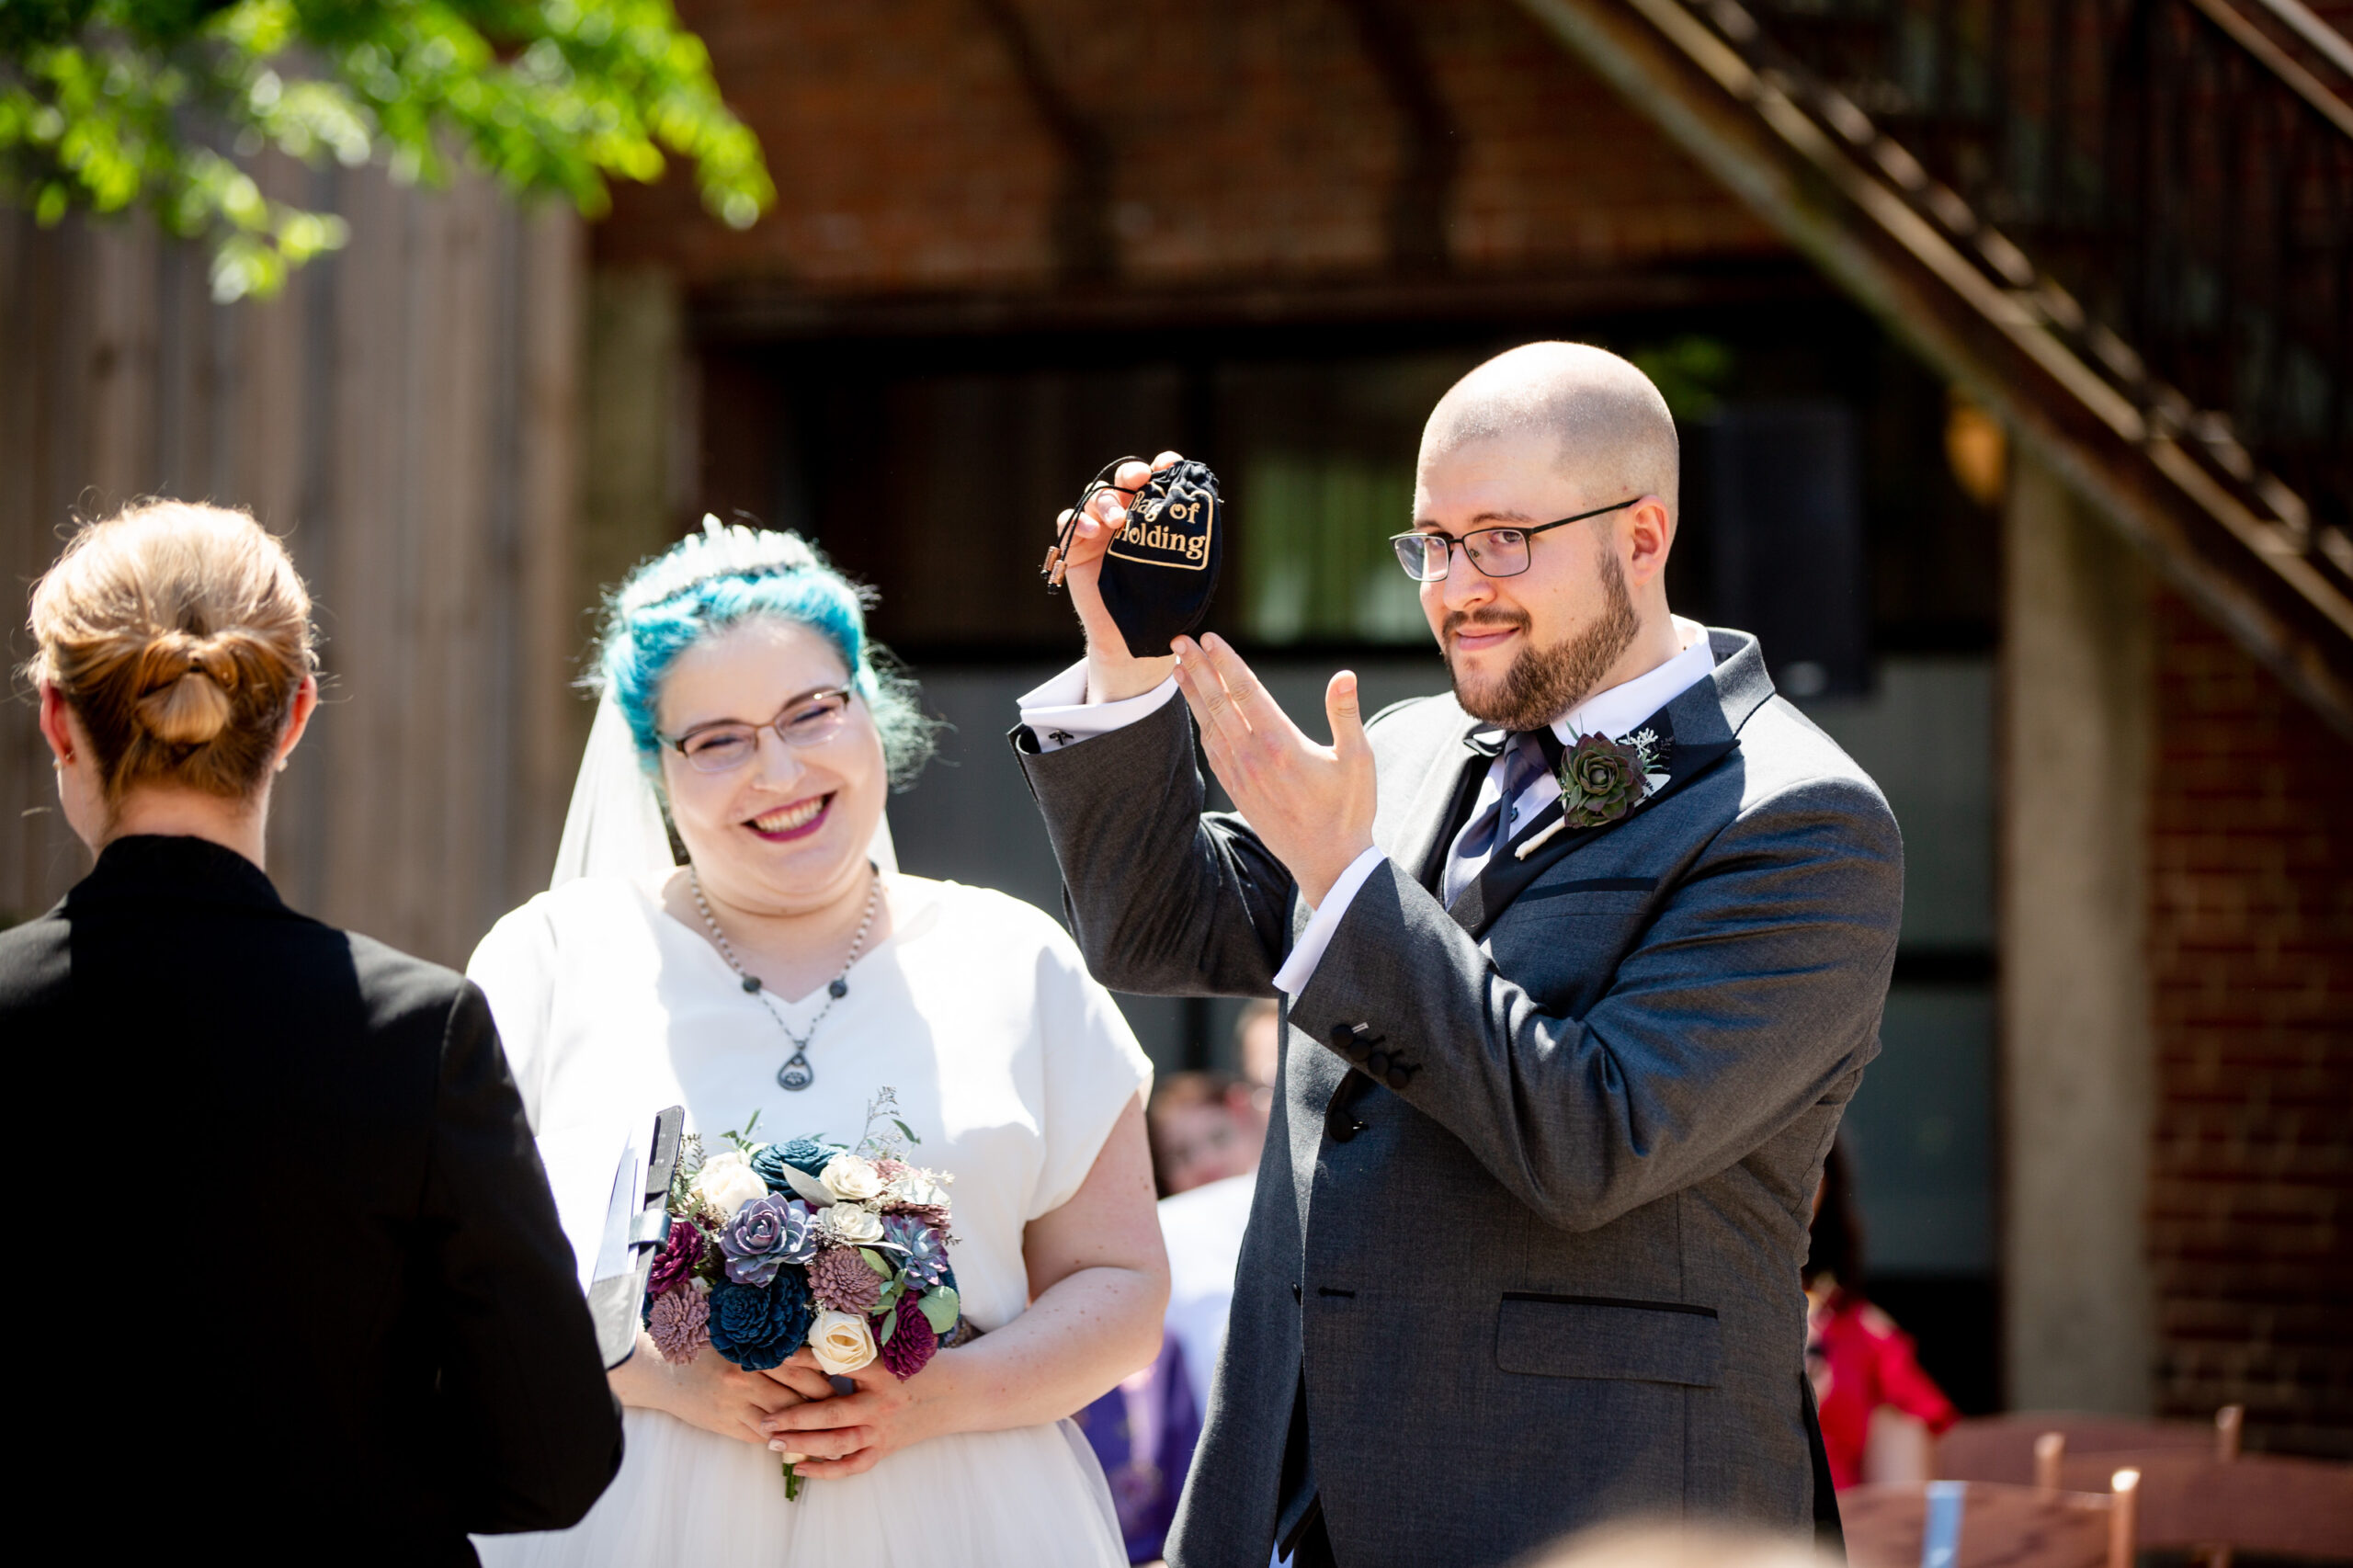 A groom holds a tiny black bag with one hand while gesturing to it with the other. His bride stands smiling nearby, holding a colorful bouquet of paper flowers. 